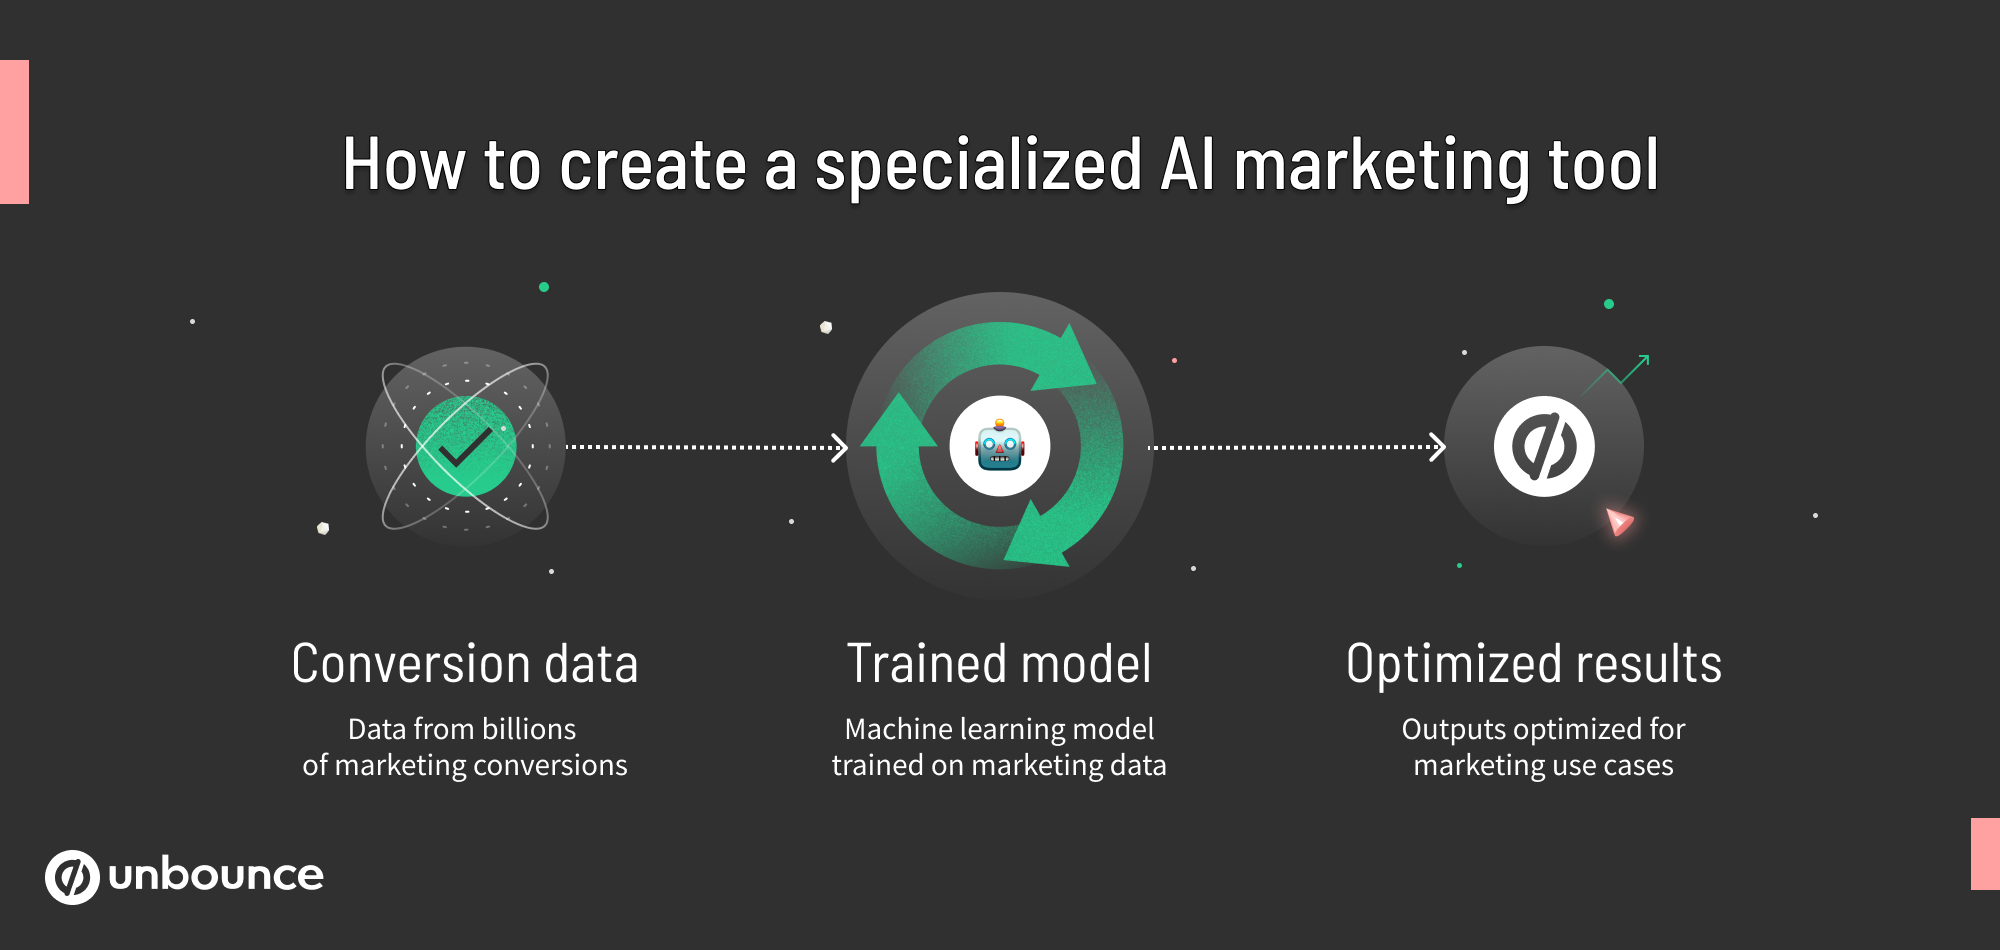 A diagram showing how machine learning models can be trained with marketing data to produce optimized results. 